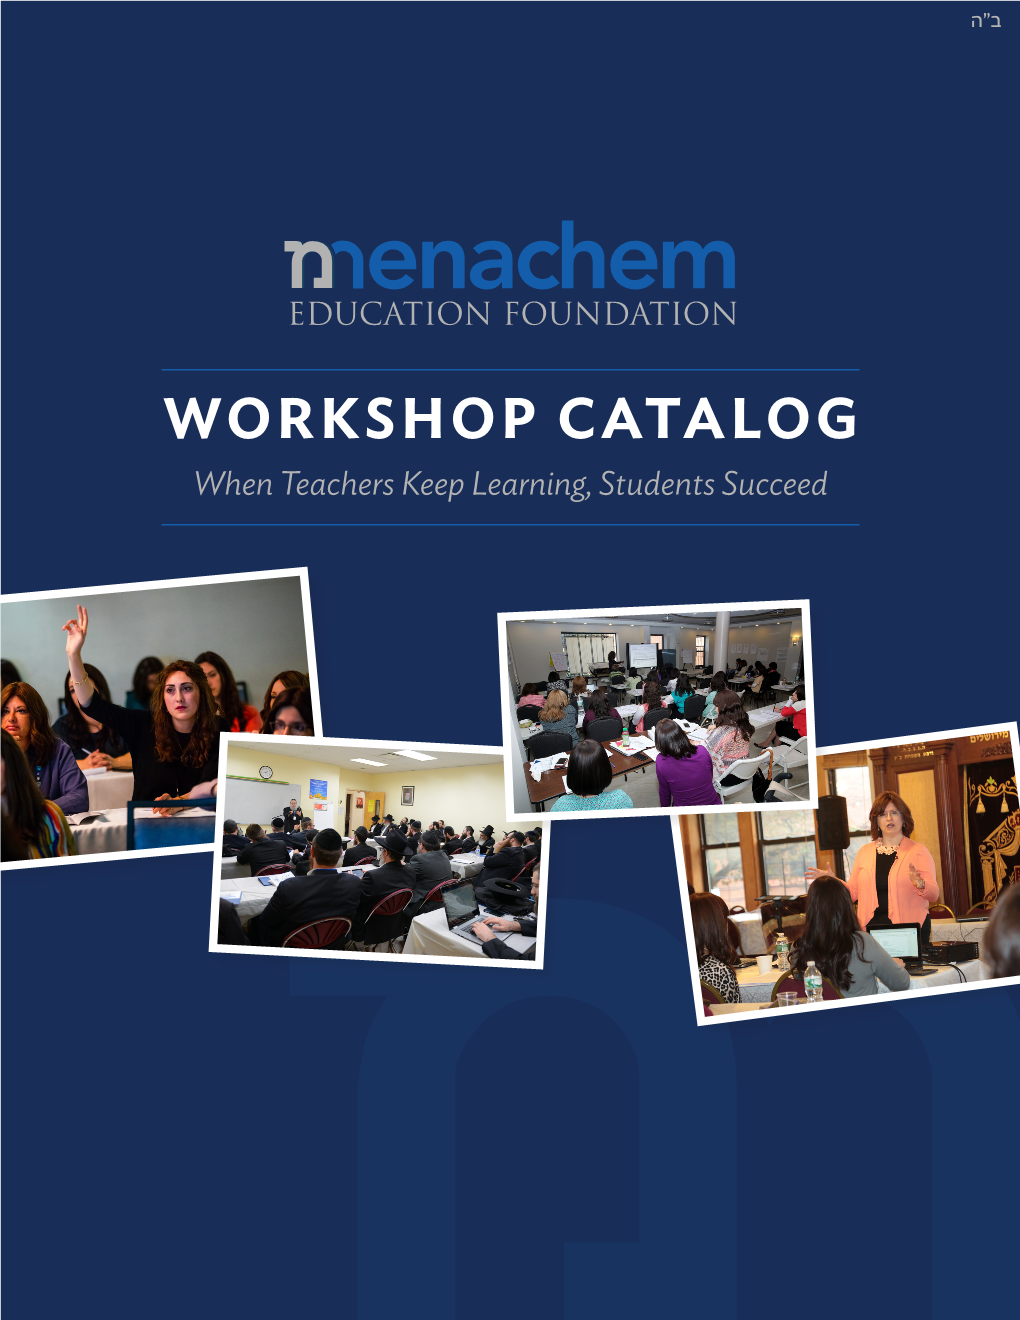 WORKSHOP CATALOG When Teachers Keep Learning, Students Succeed